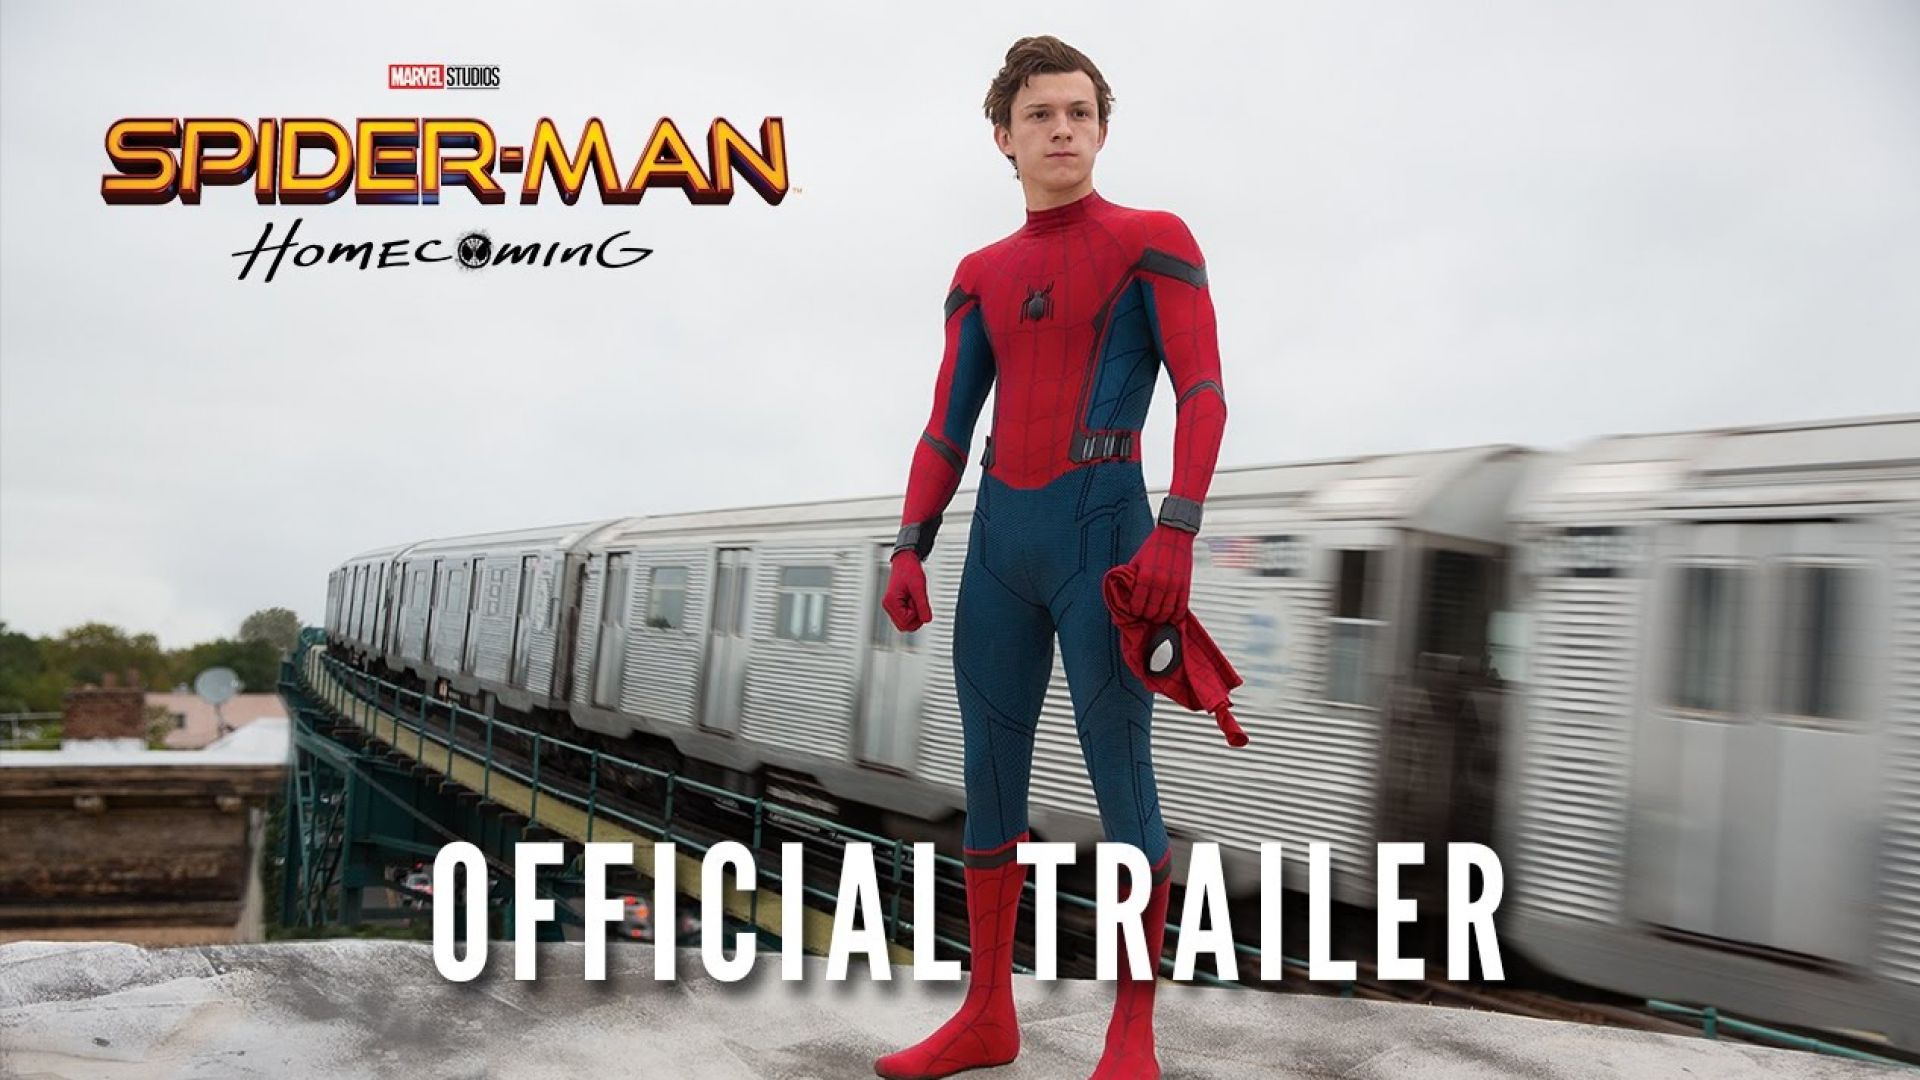 Spider-Man swings into action in the first trailer for 'Spid